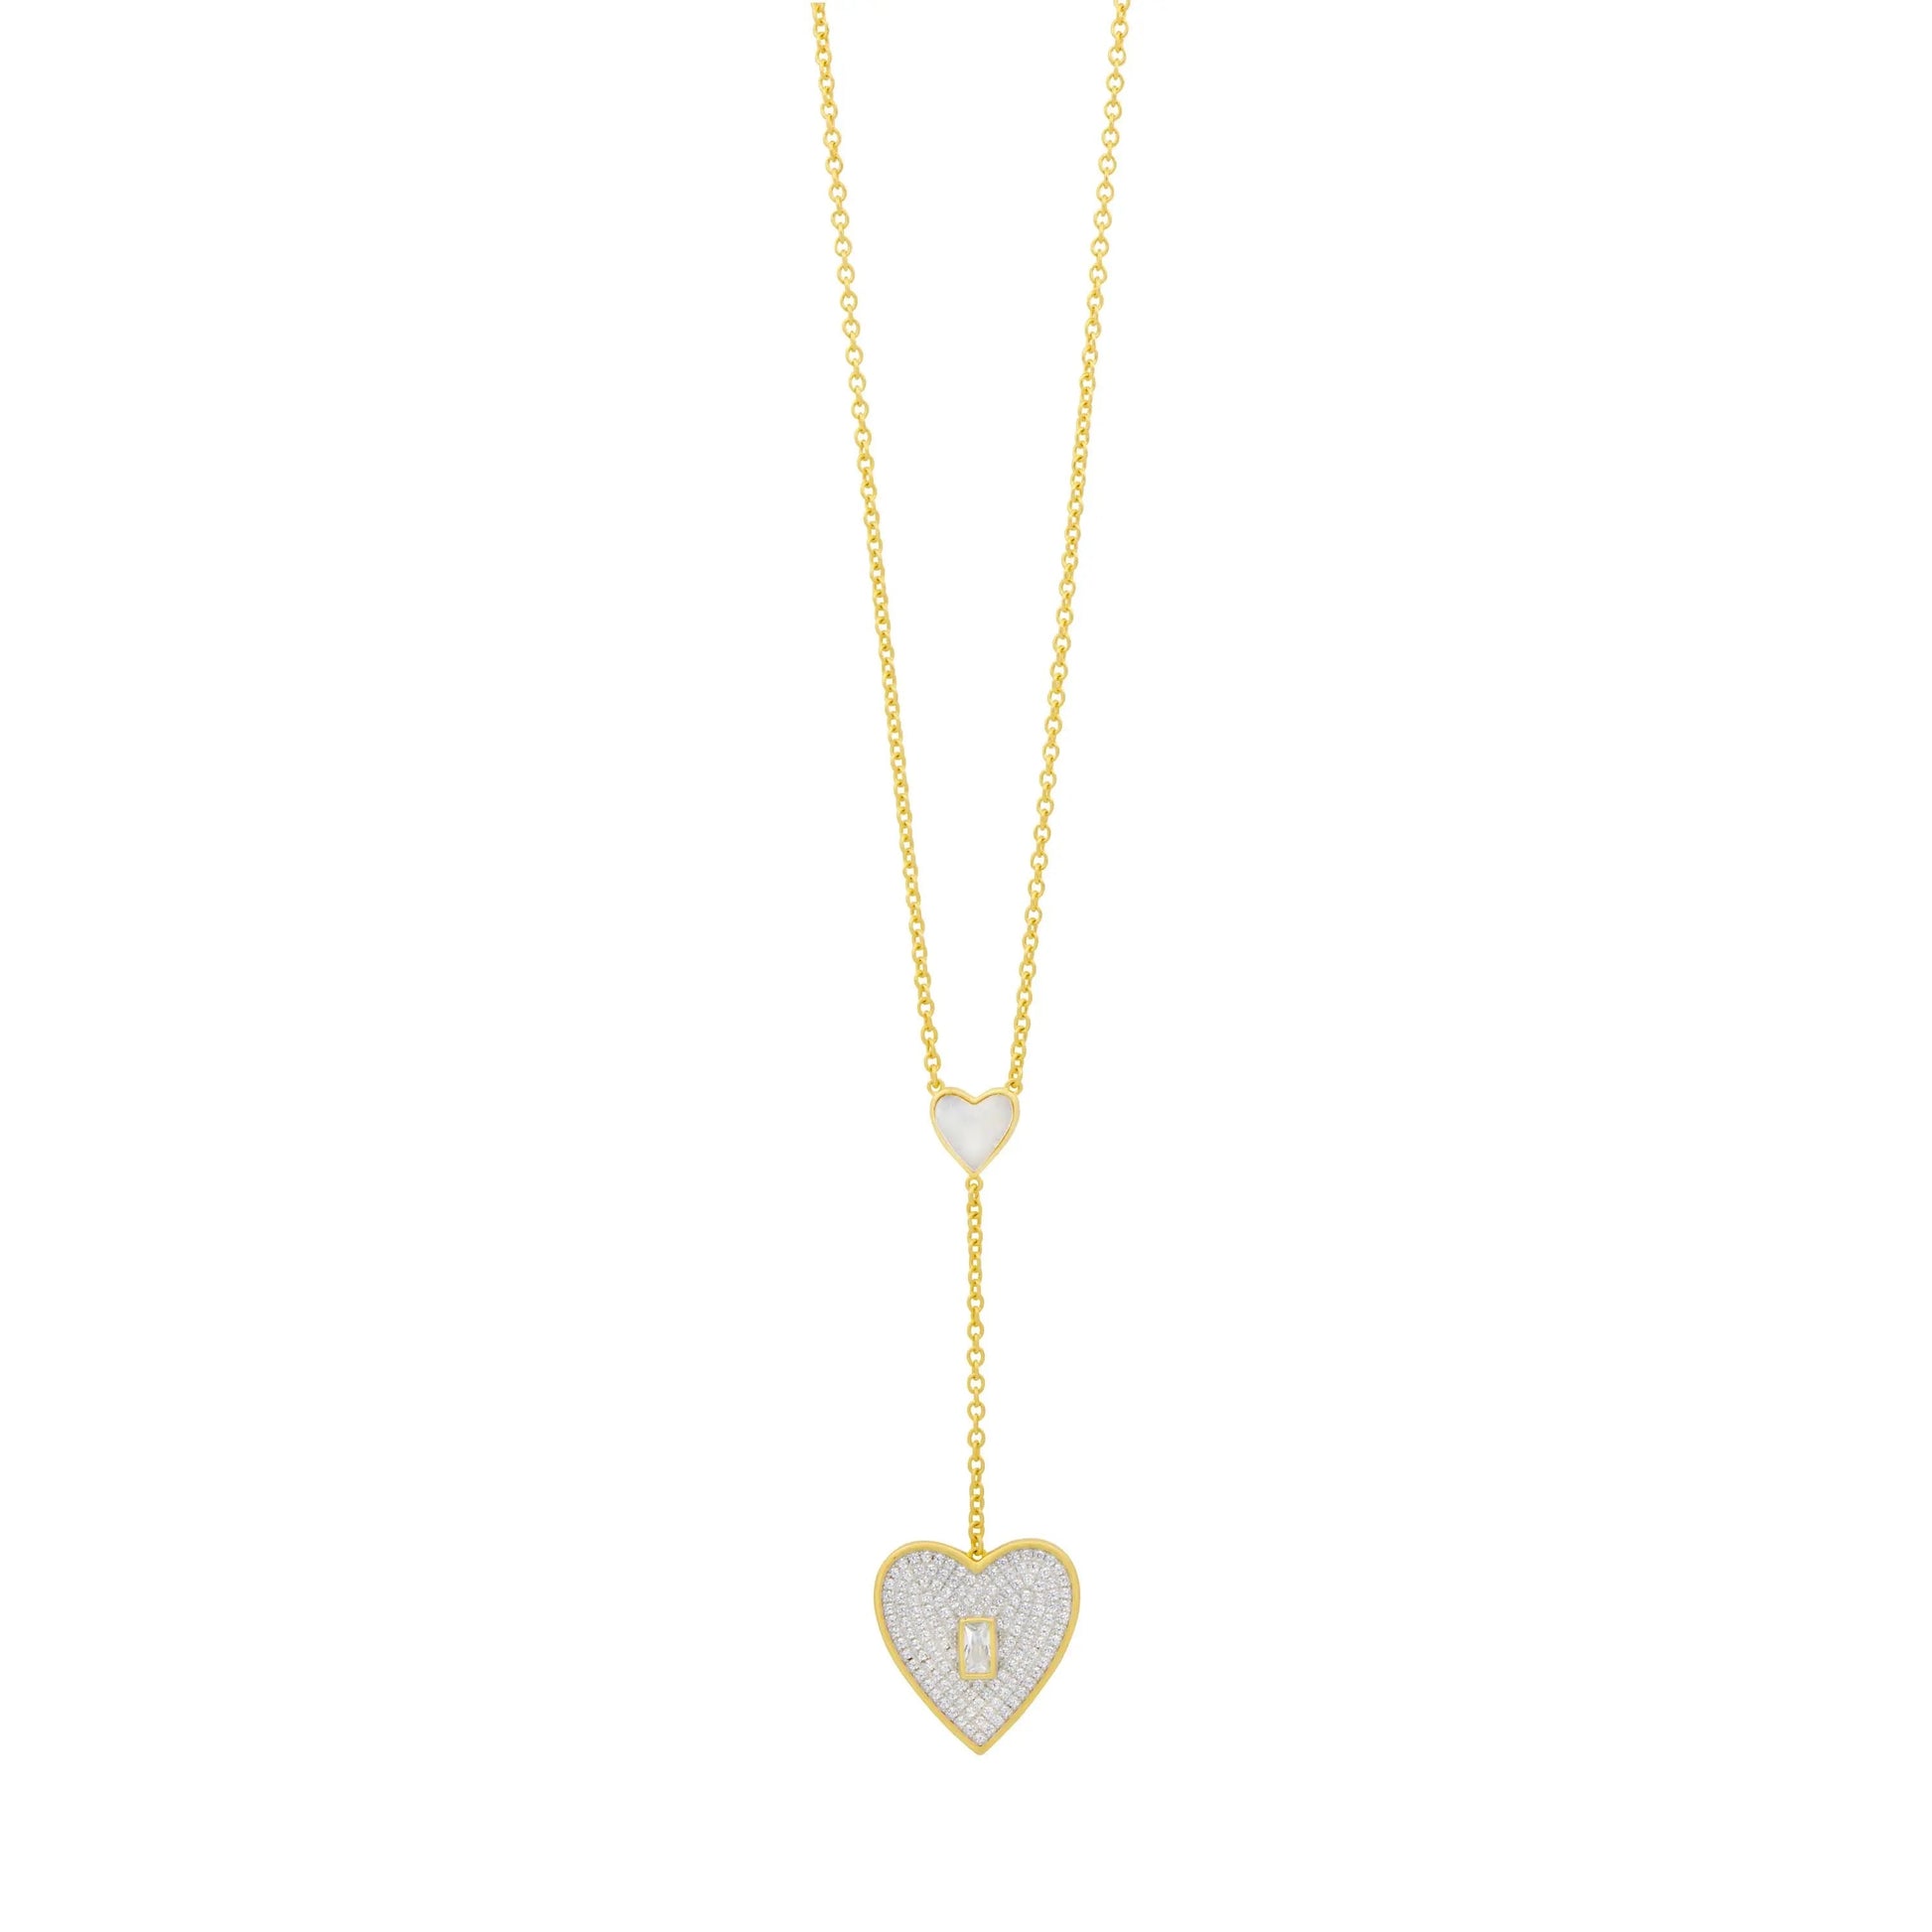  From the Heart Lariat Necklace Valentine's Day Gifts NECKLACE